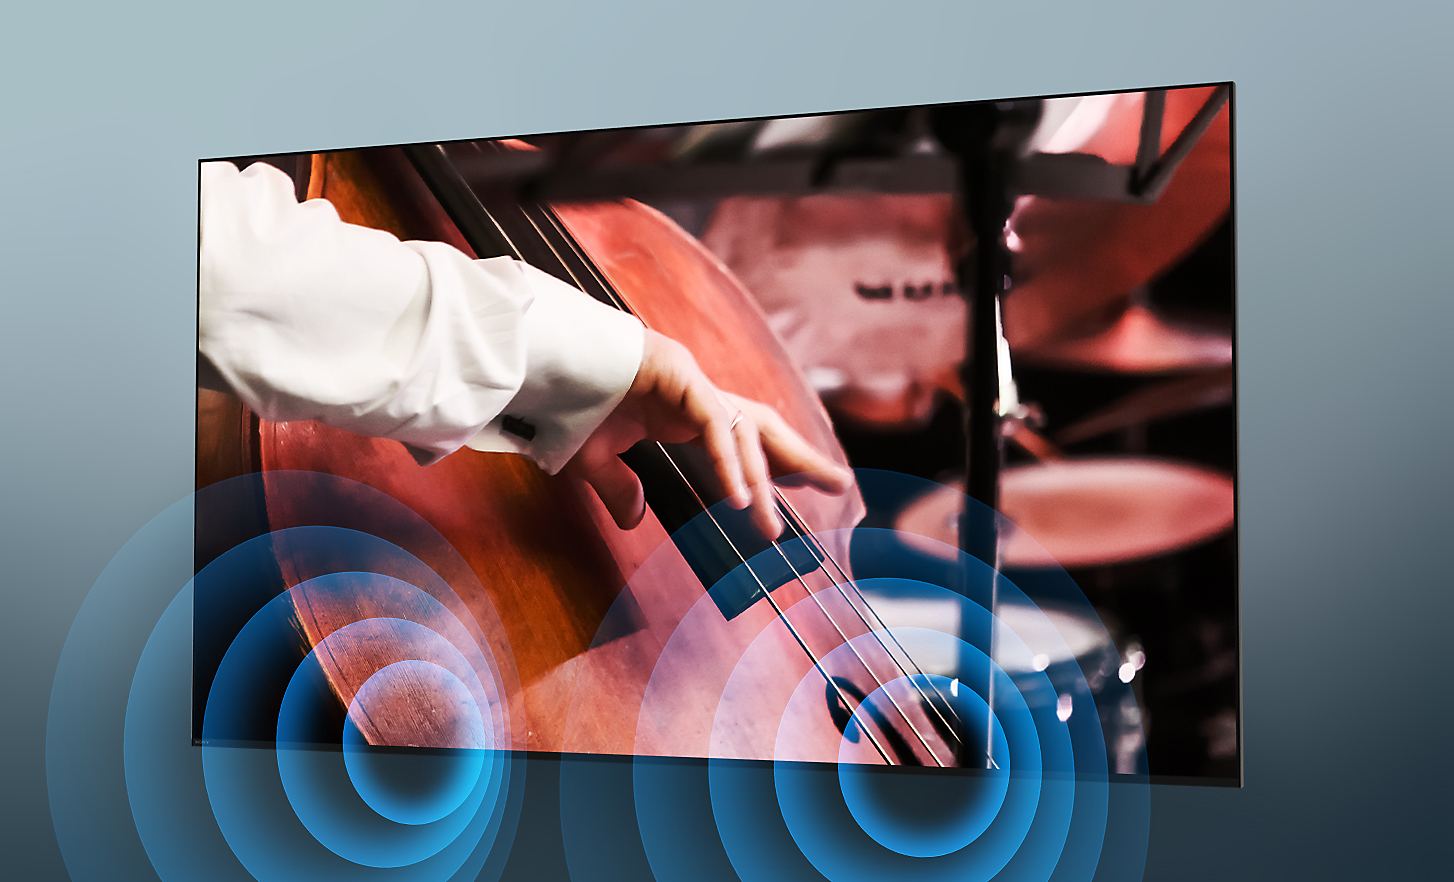 BRAVIA TV with screenshot of musician playing double bass in an orchestra